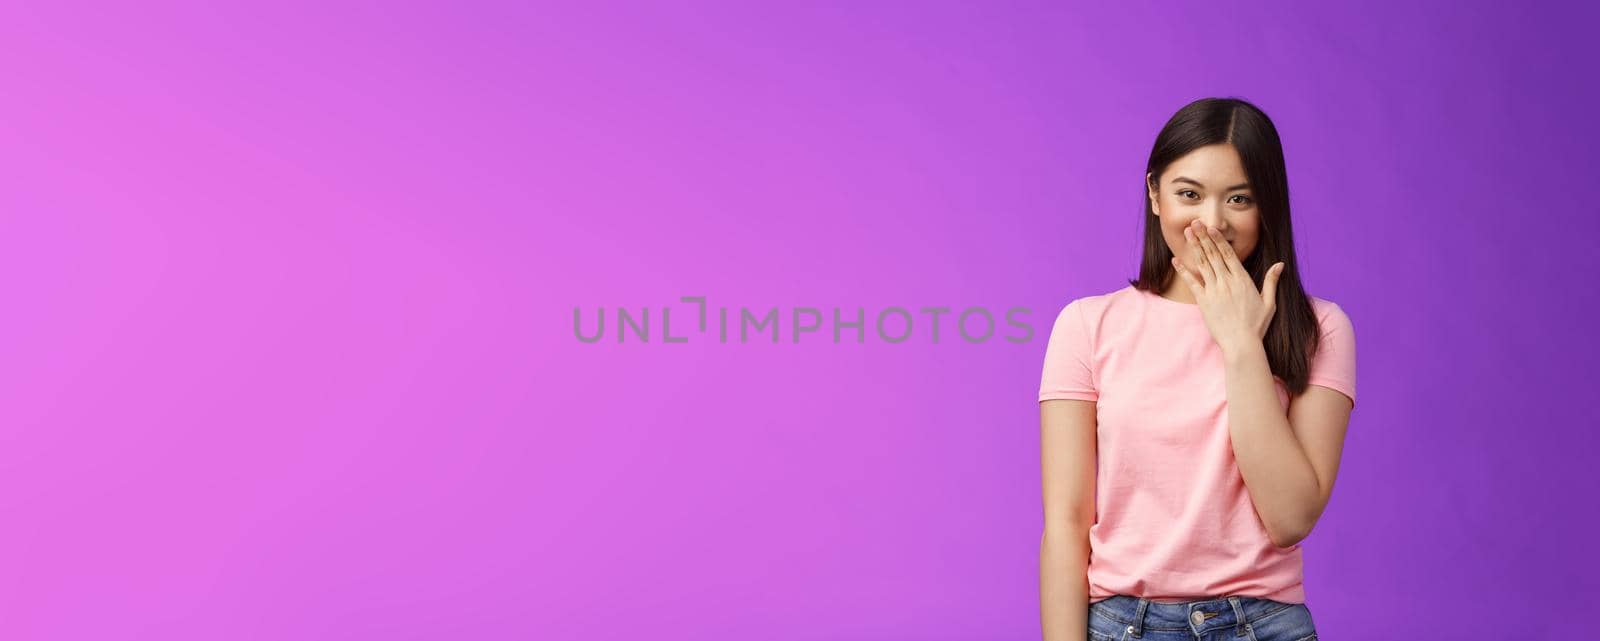 Timid cute stylish modern asian woman giggling, gossiping, cover smiling lips, laughing out loud joyfully, look camera entertained, fool around, spread funny rumors, stand purple background.